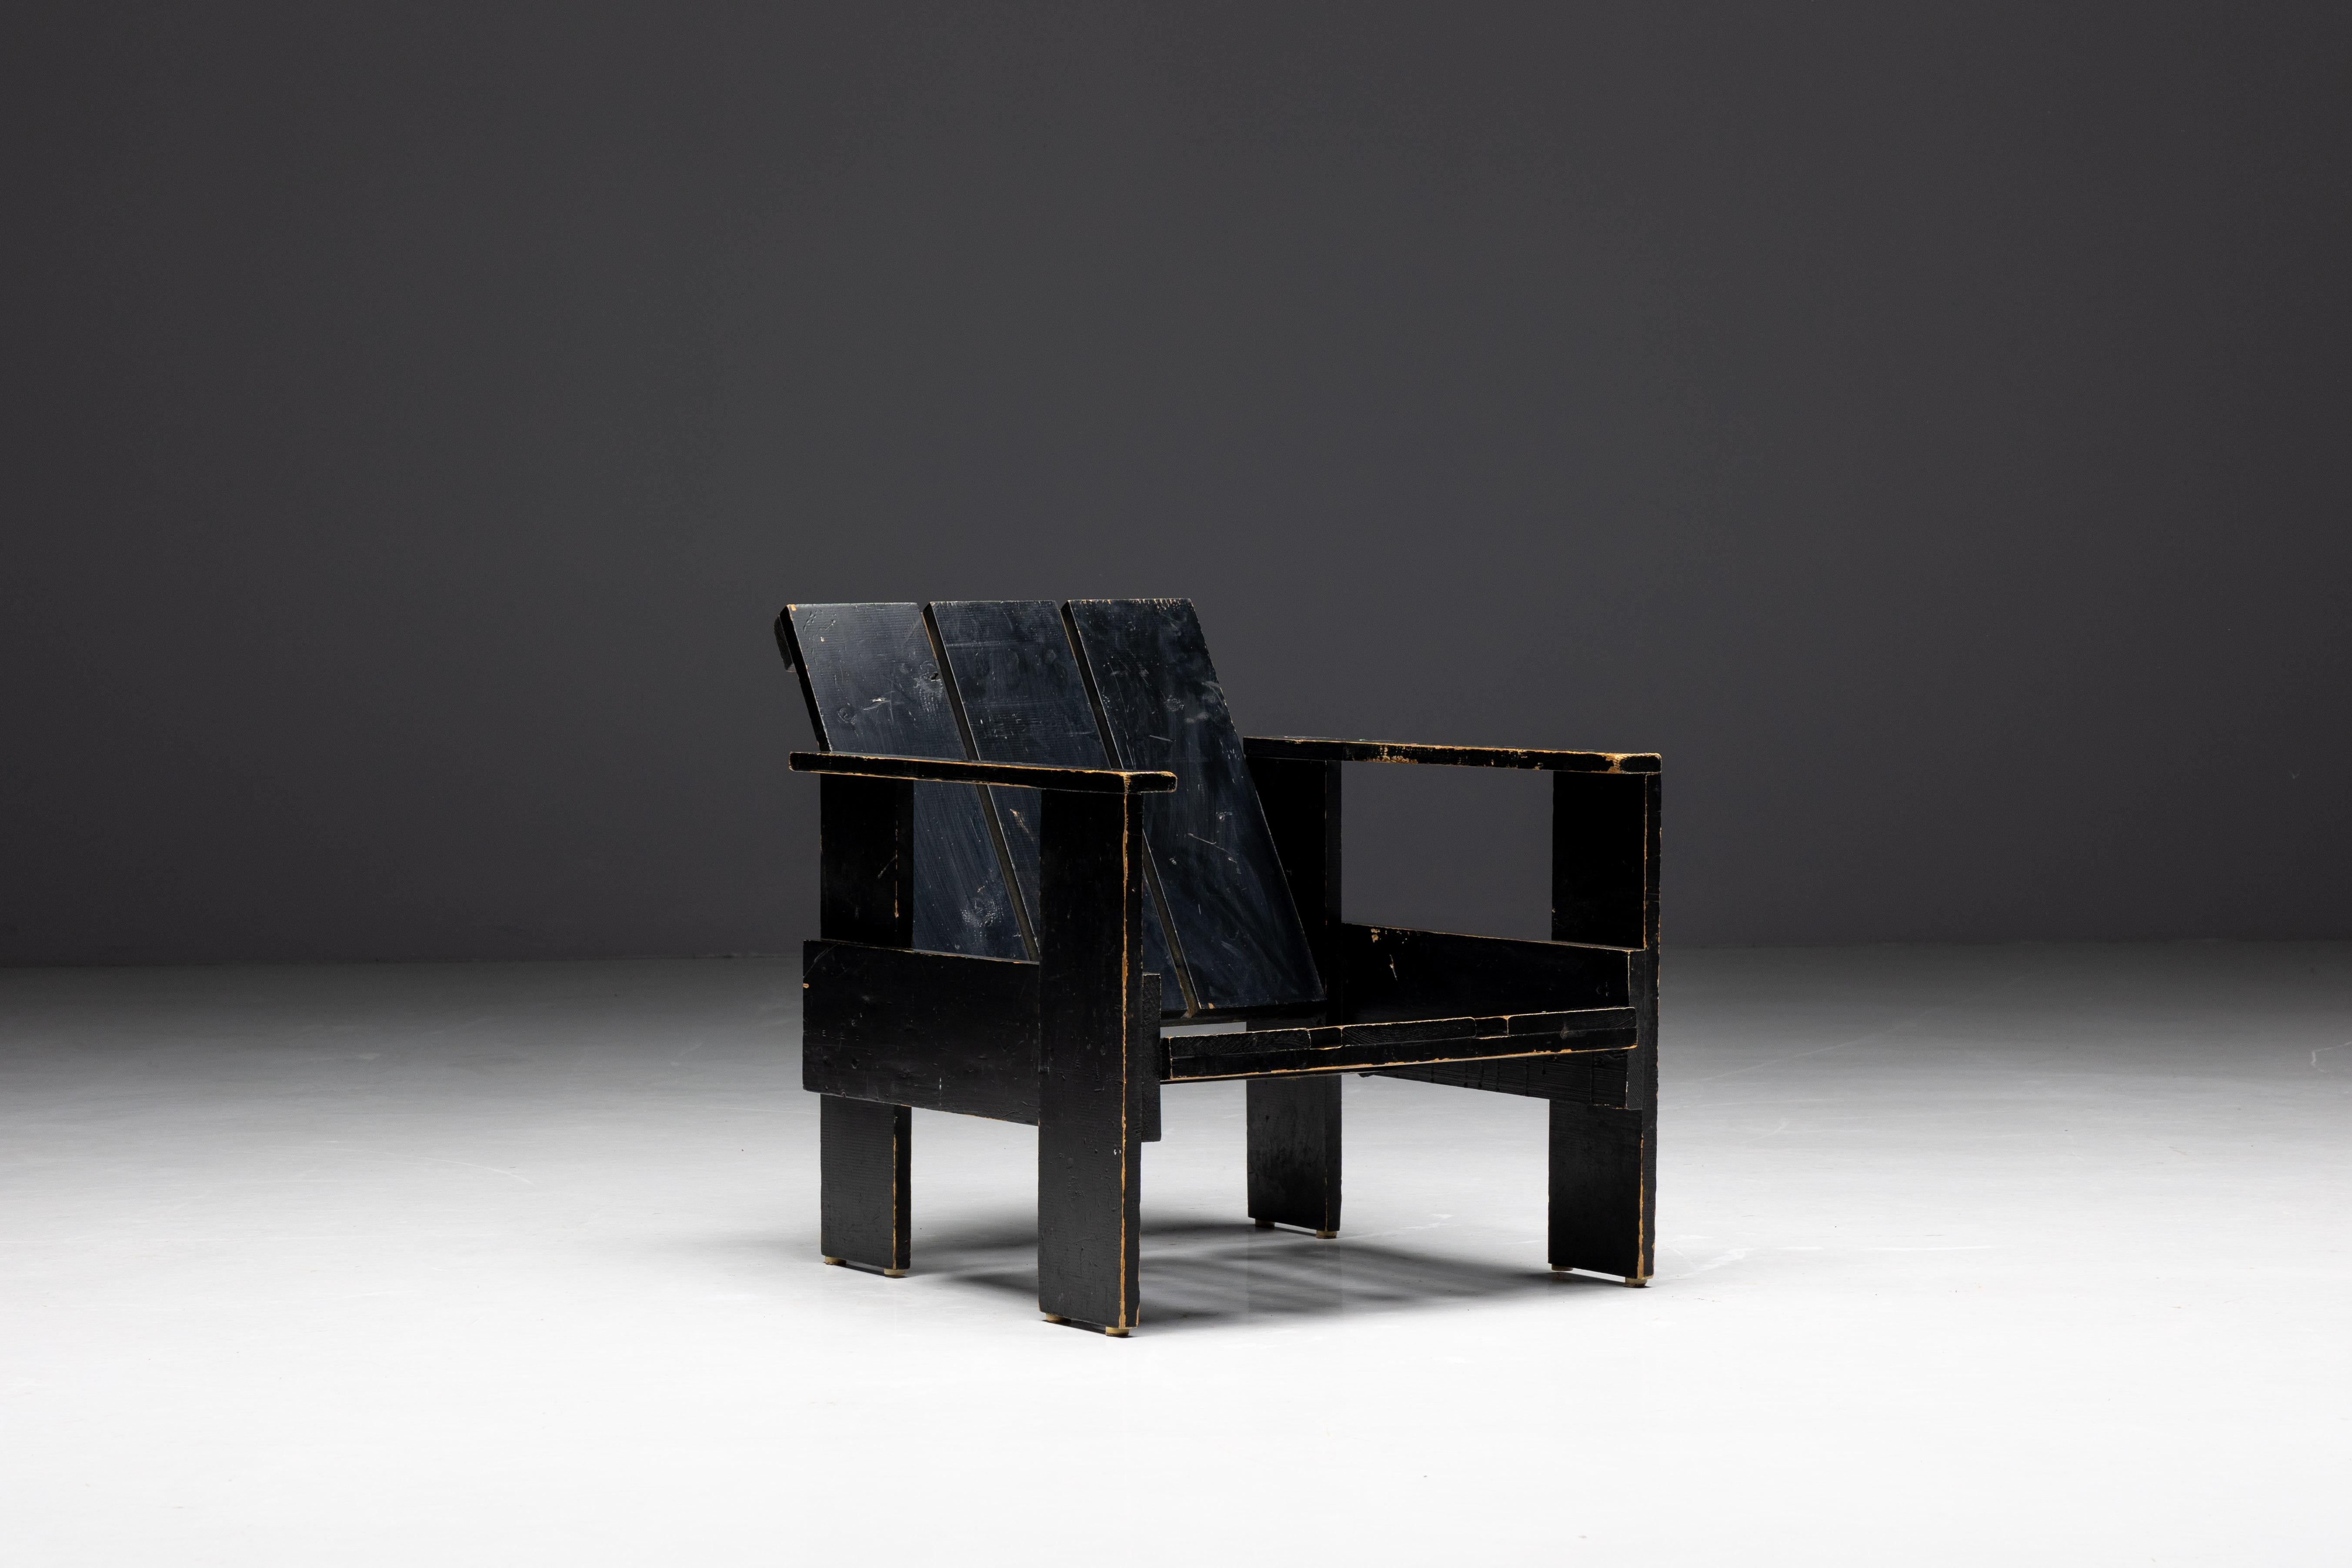 Crate Chairs by Gerrit Rietveld, Netherlands, 1940s For Sale 2